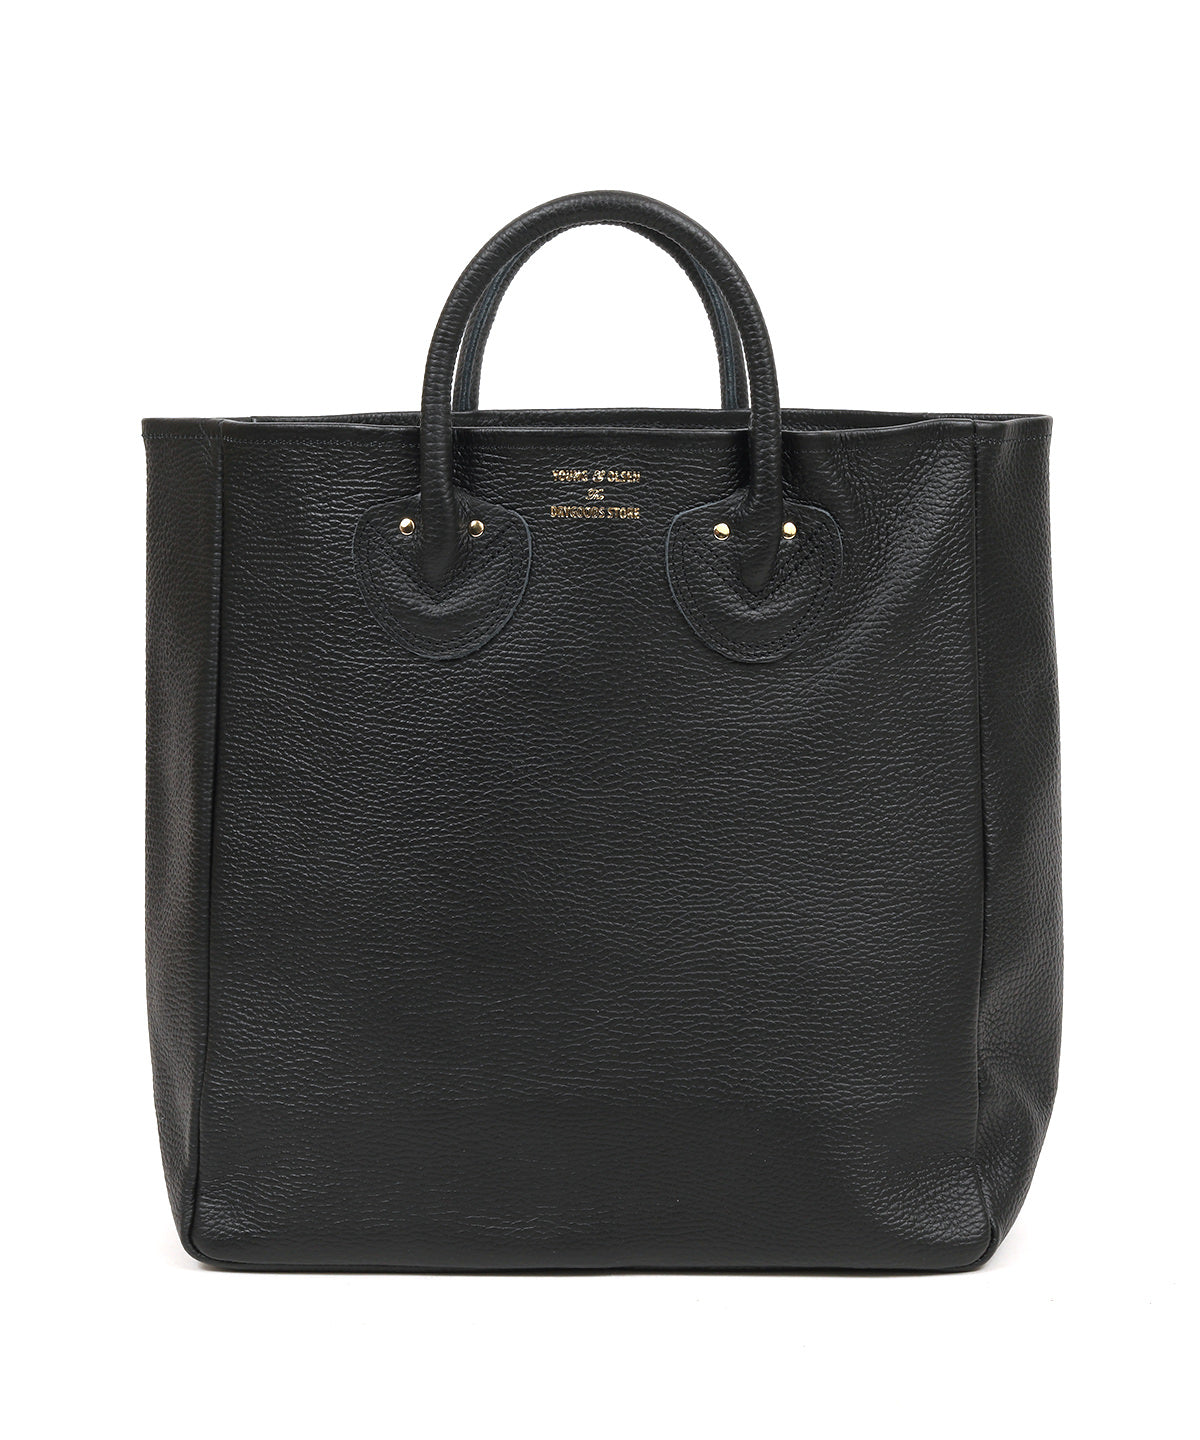 PAINTED LEATHER TOTE M